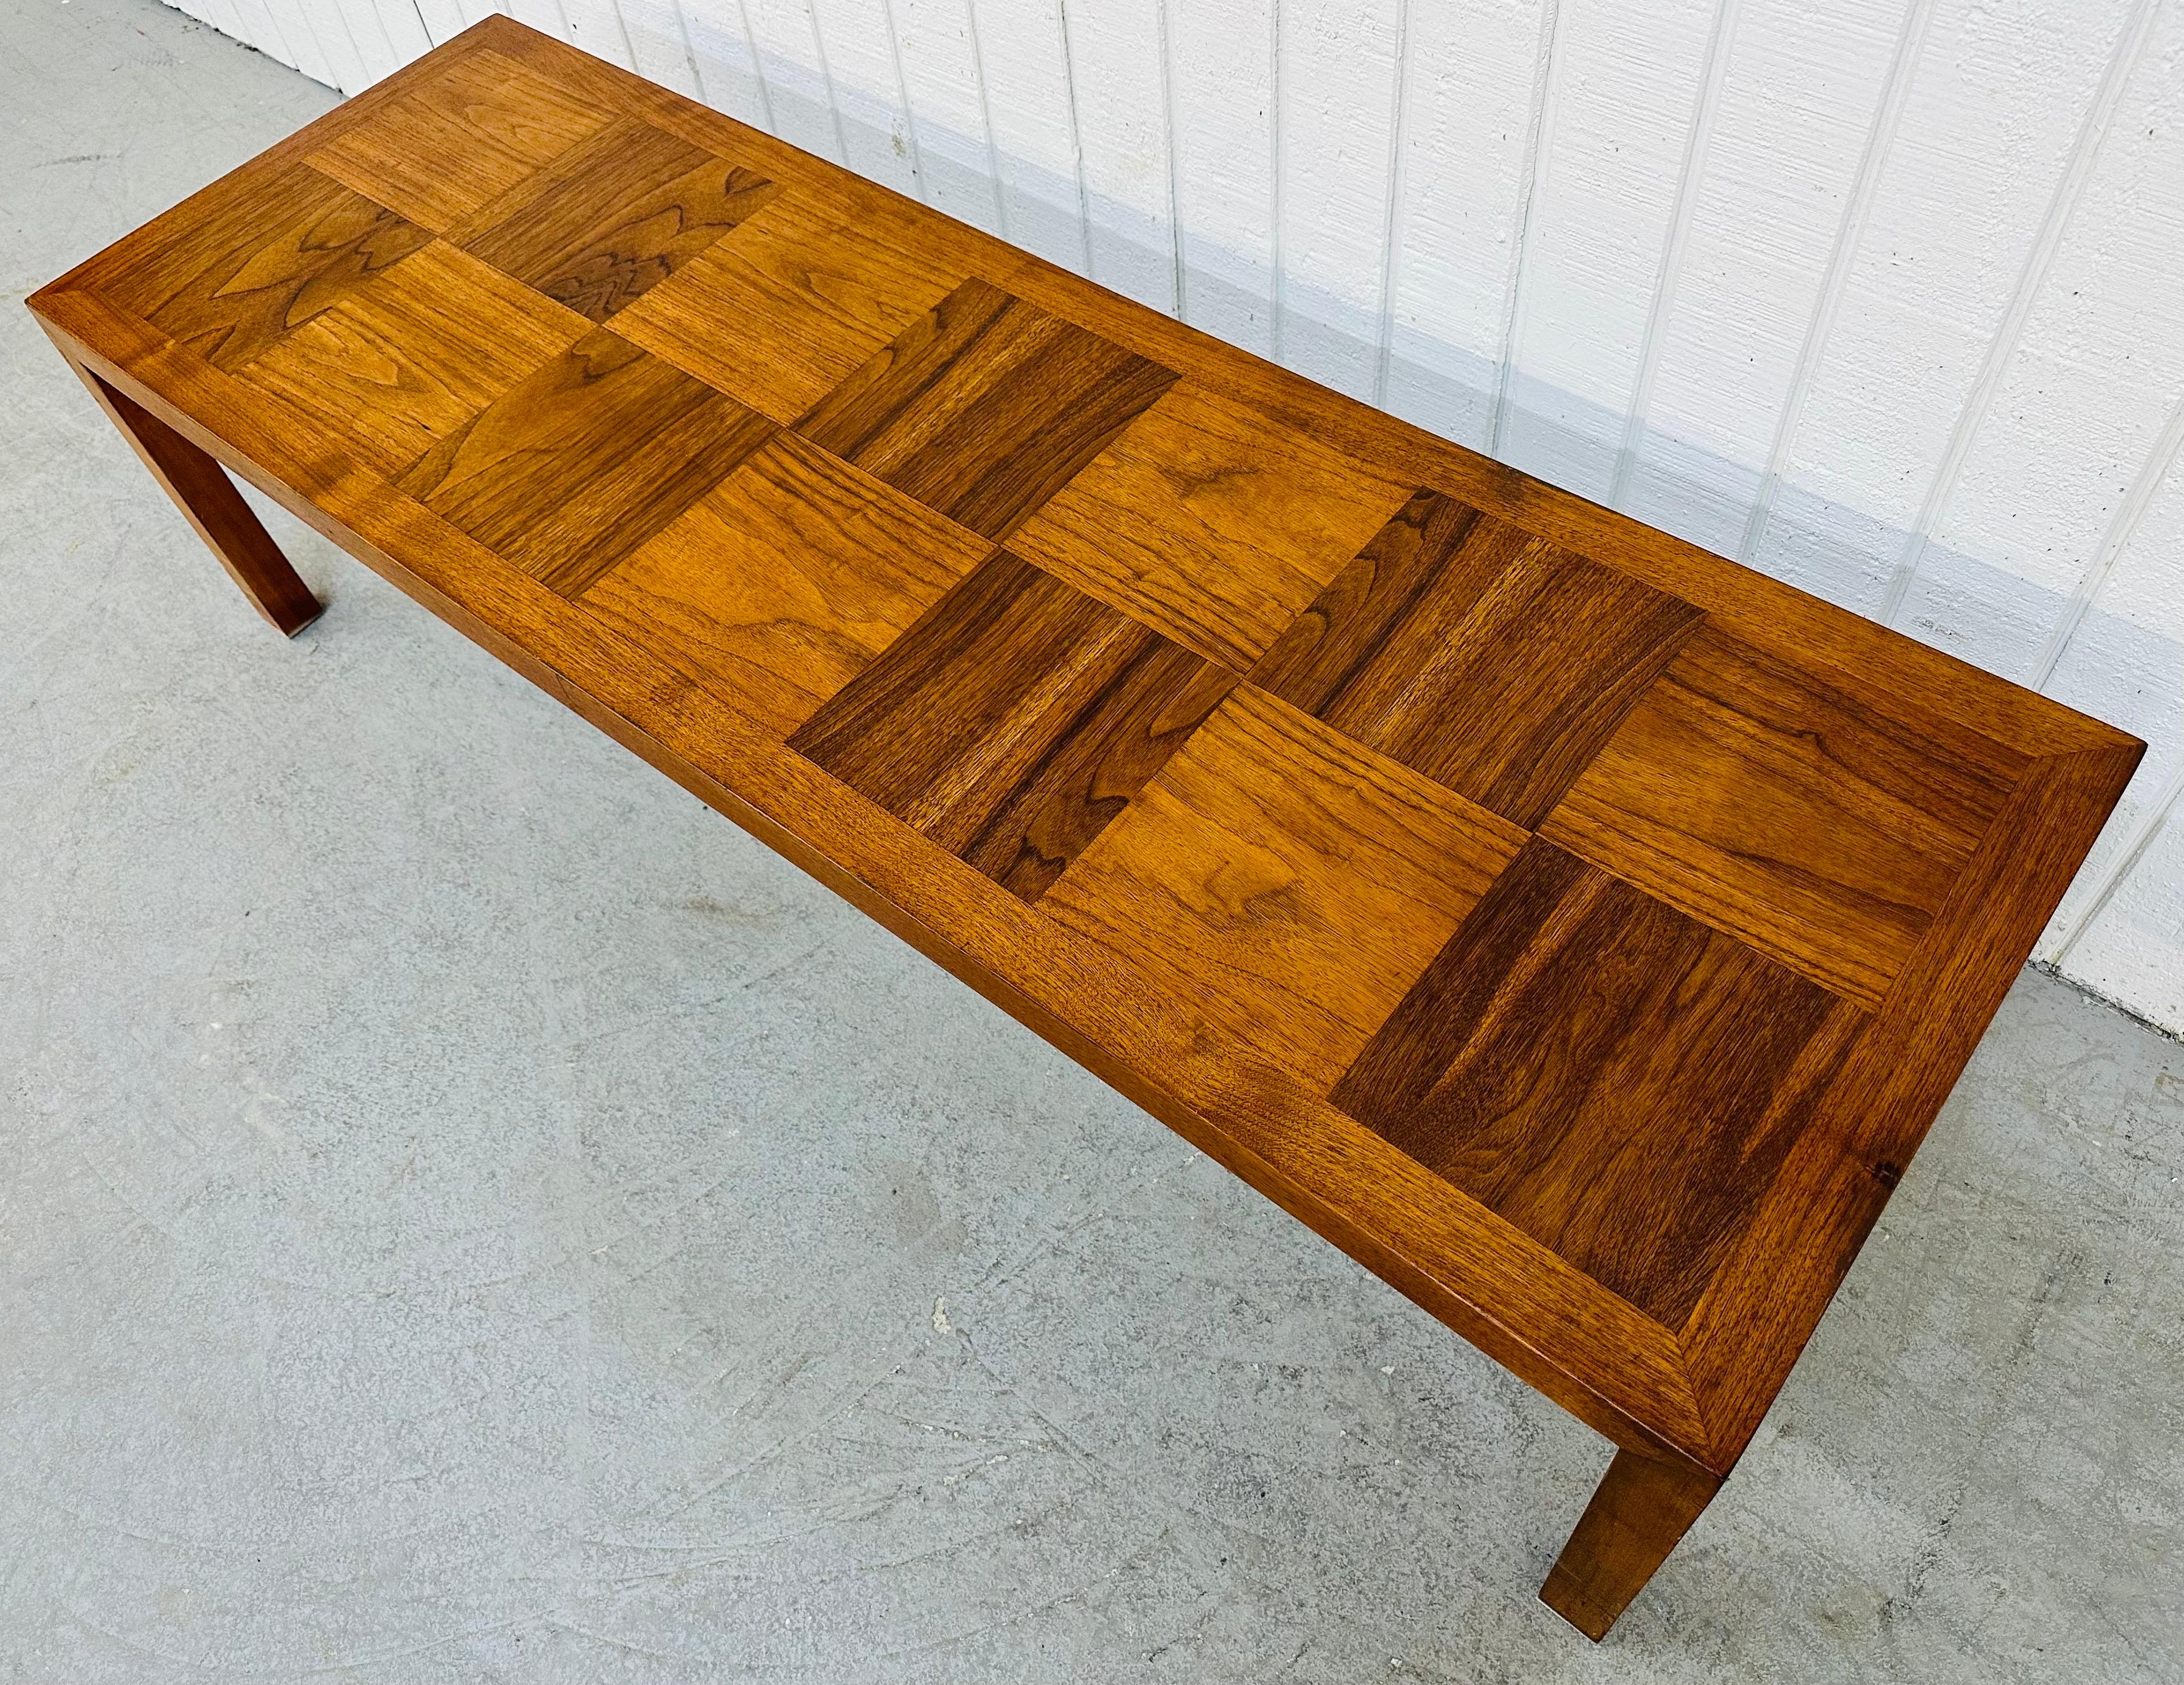 This listing is for a Mid-Century Modern Lane Walnut Coffee Table. Featuring a two-tone walnut checkerboard style rectangular top, straight line attached legs, and a beautiful walnut finish. This is an exceptional combination of quality and modern